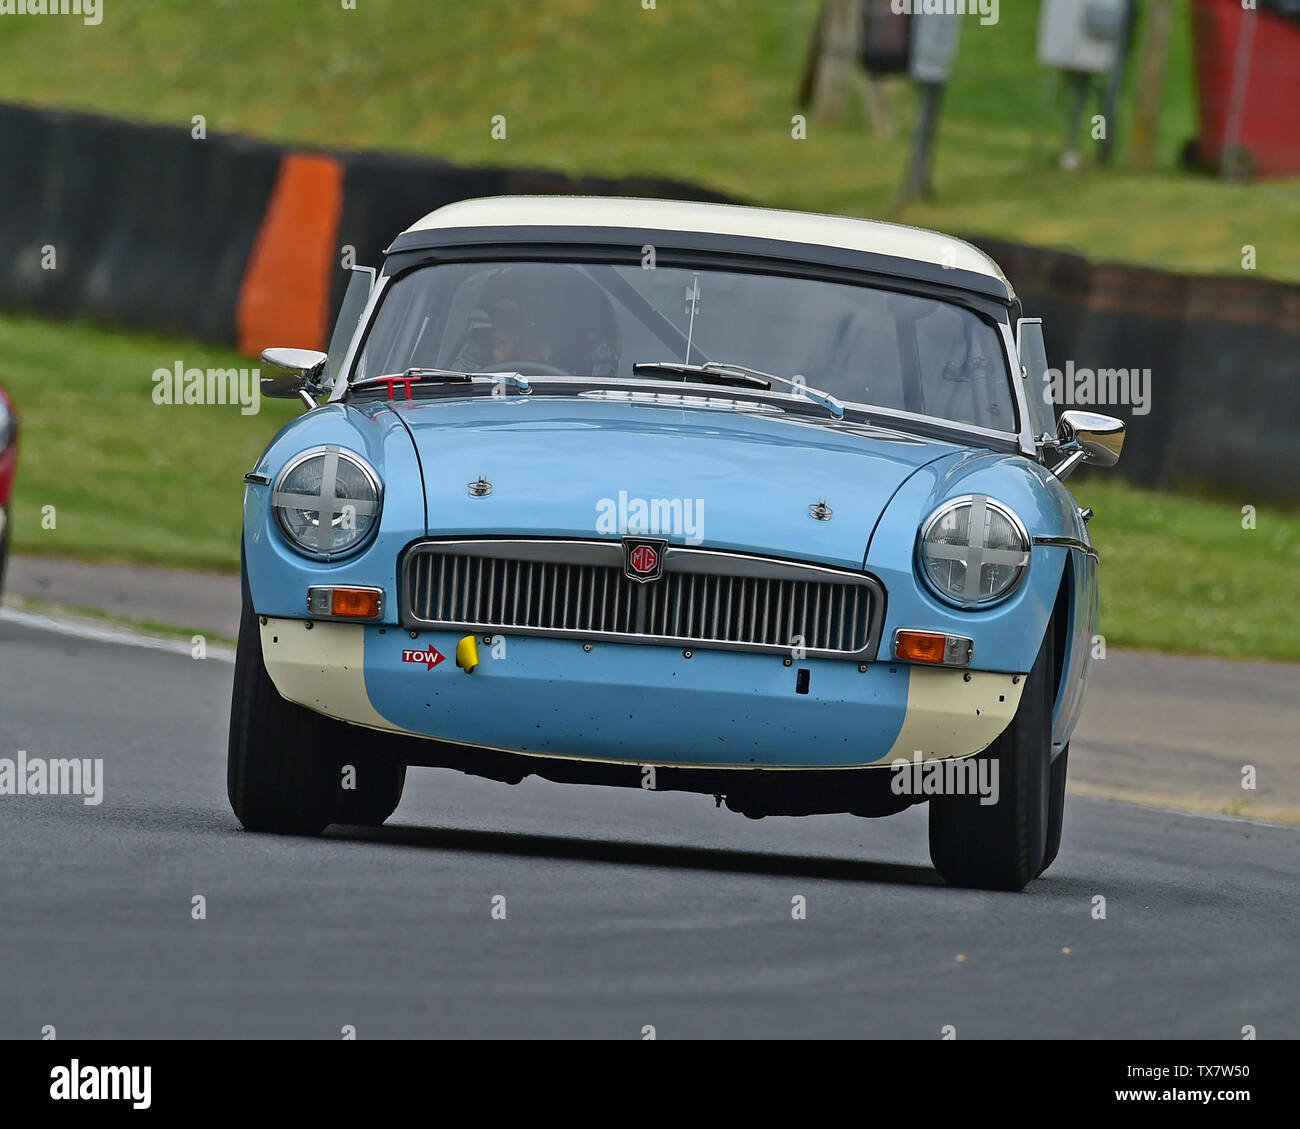 Colin Kingsnorth, MGB, Equipe GTS, Masters Historic Festival, Brands Hatch, May 2019. Brands Hatch, classic cars, classic event, Classic Racing Cars, Stock Photo